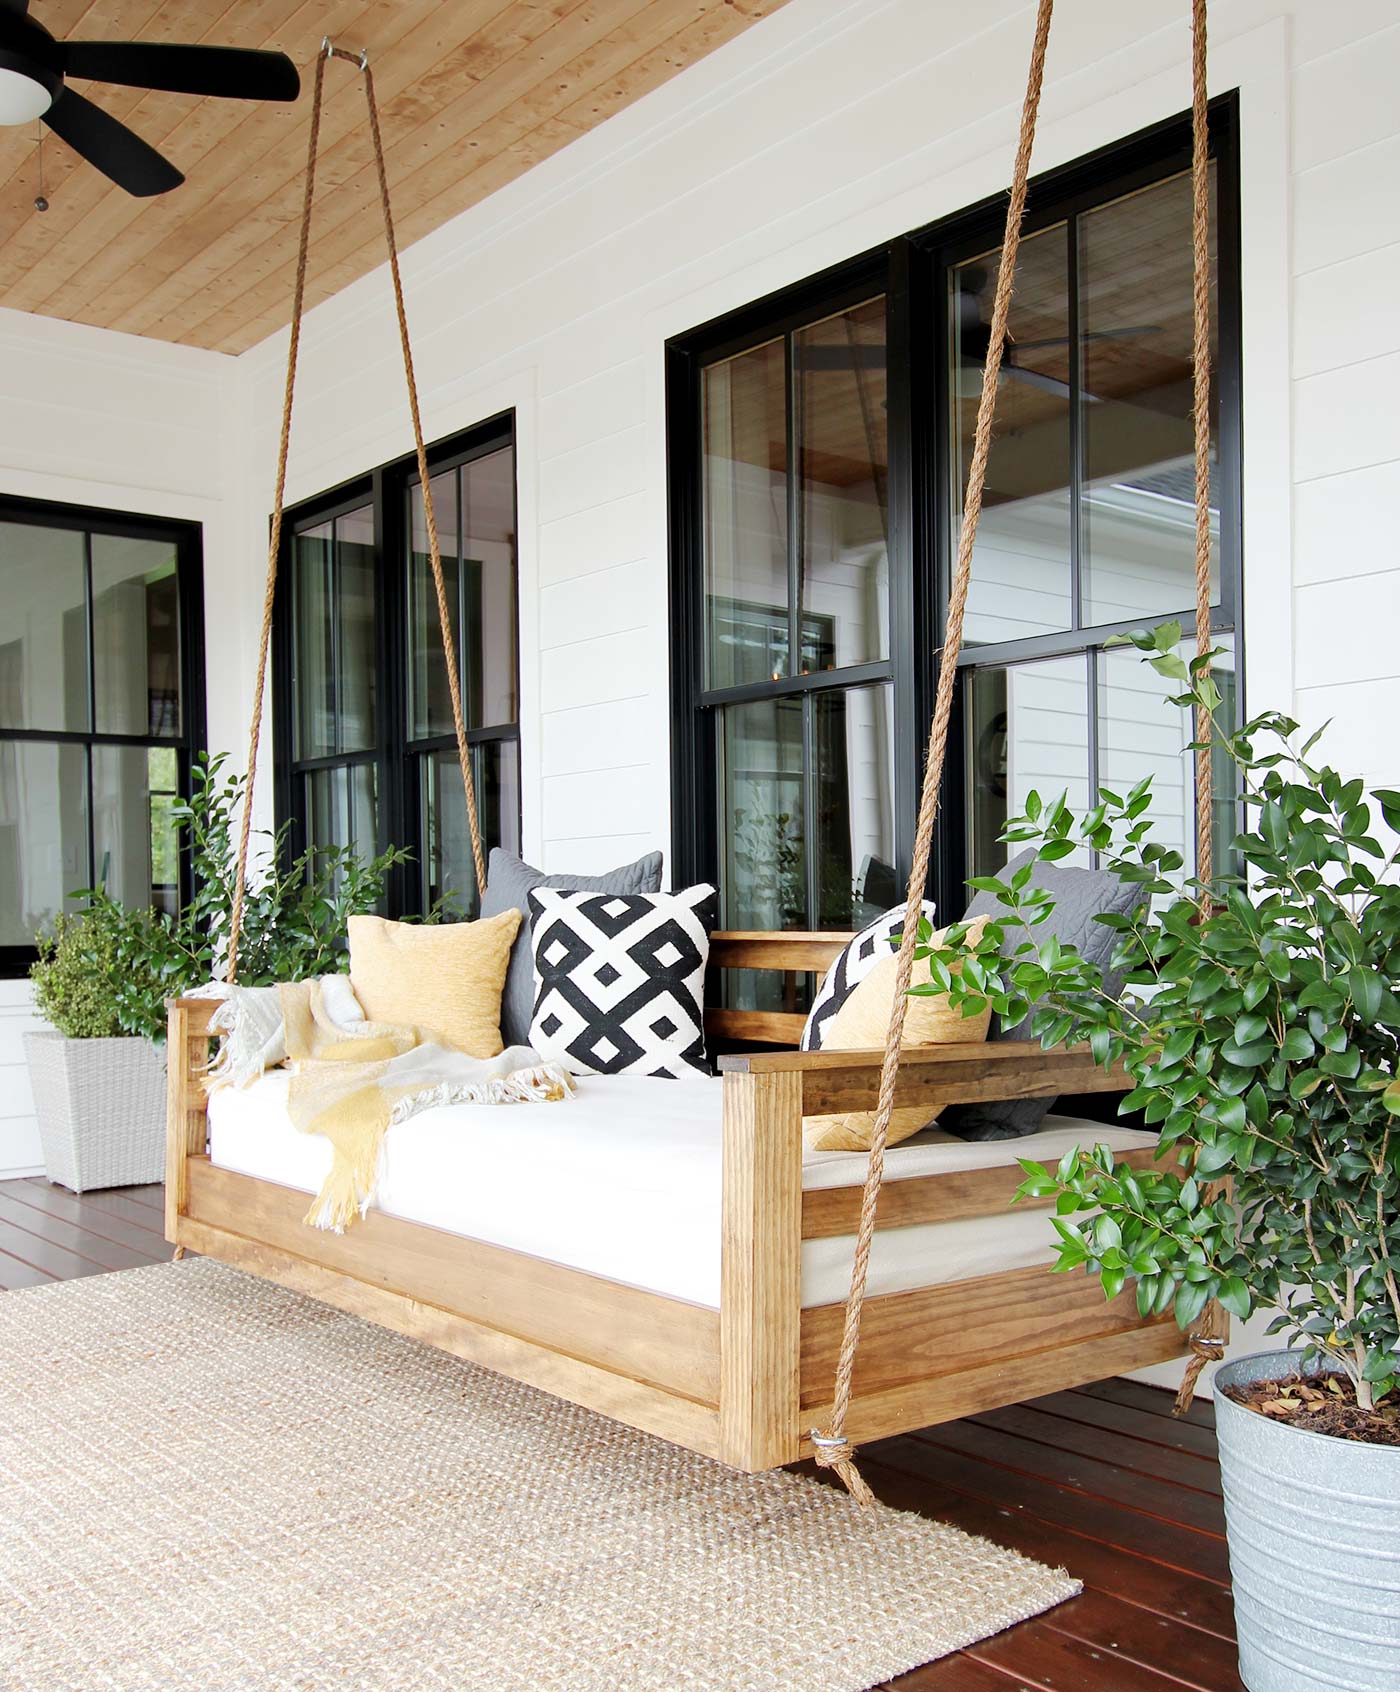 12 Porch Swing Plans: How To Build and Hang a Porch Swing